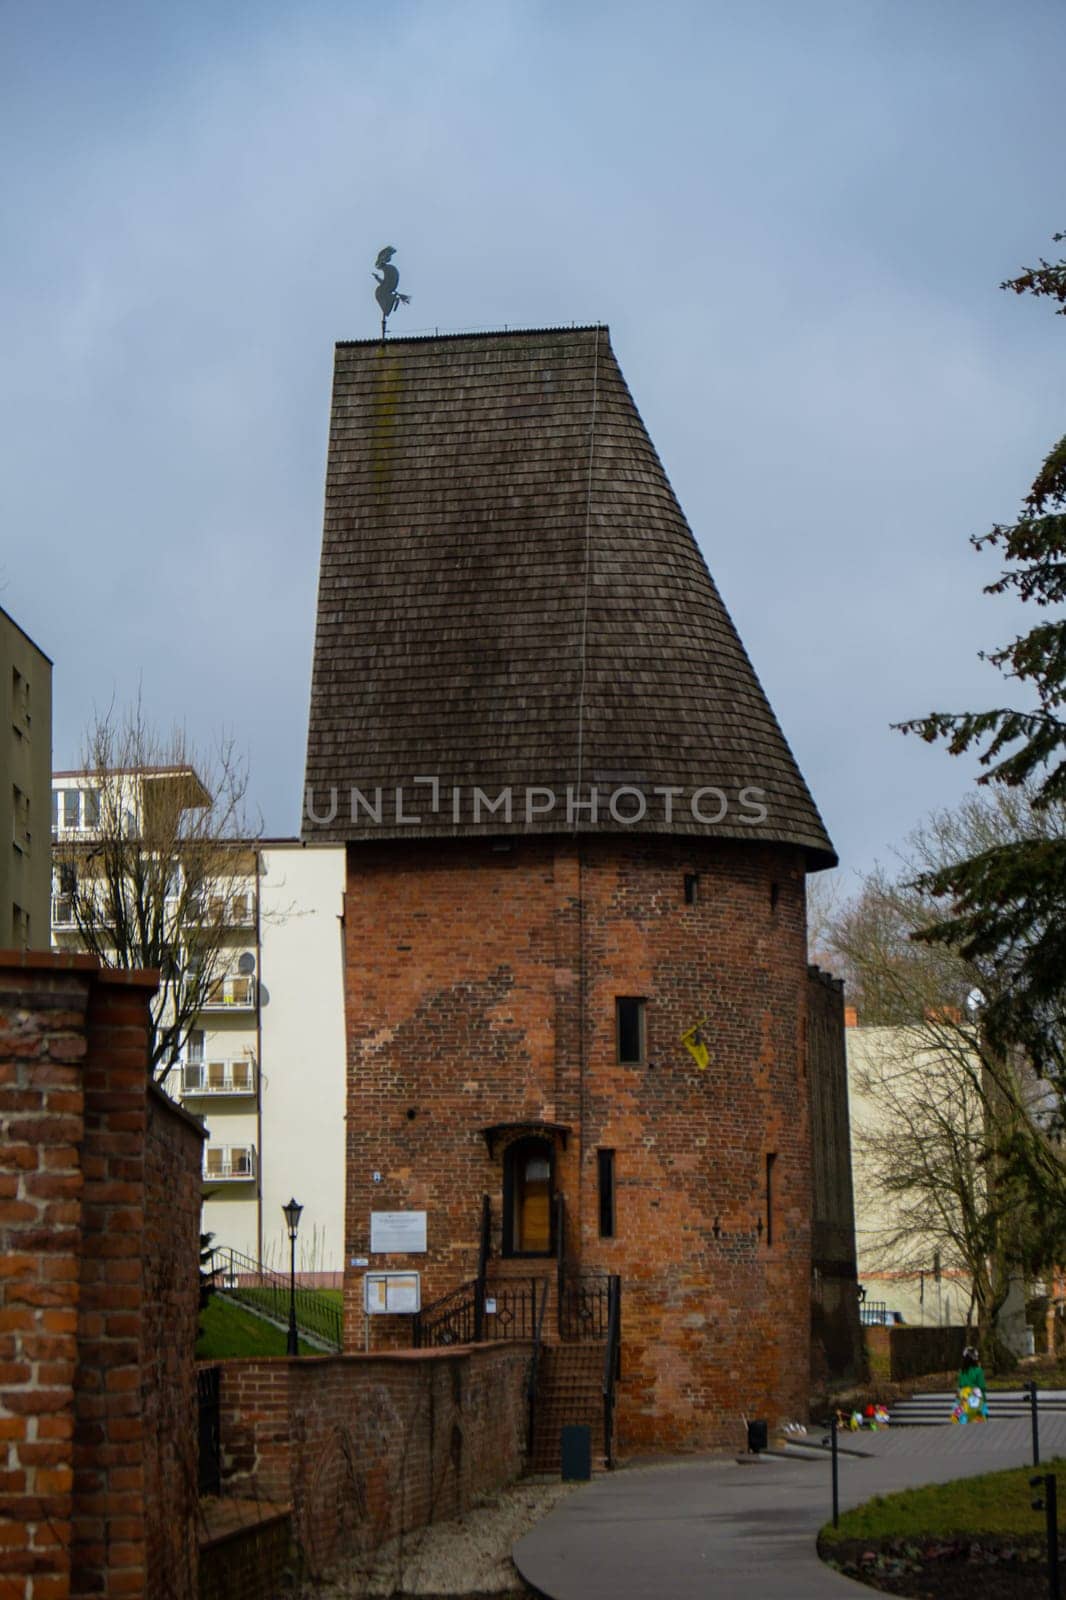 Round tower in the historic surrounding city wall of Slupsk, Poland. Witches tower - Baszta Czarownic in Slupsk. Sights of Poland. Old jail. Travel destination. Tourist attraction